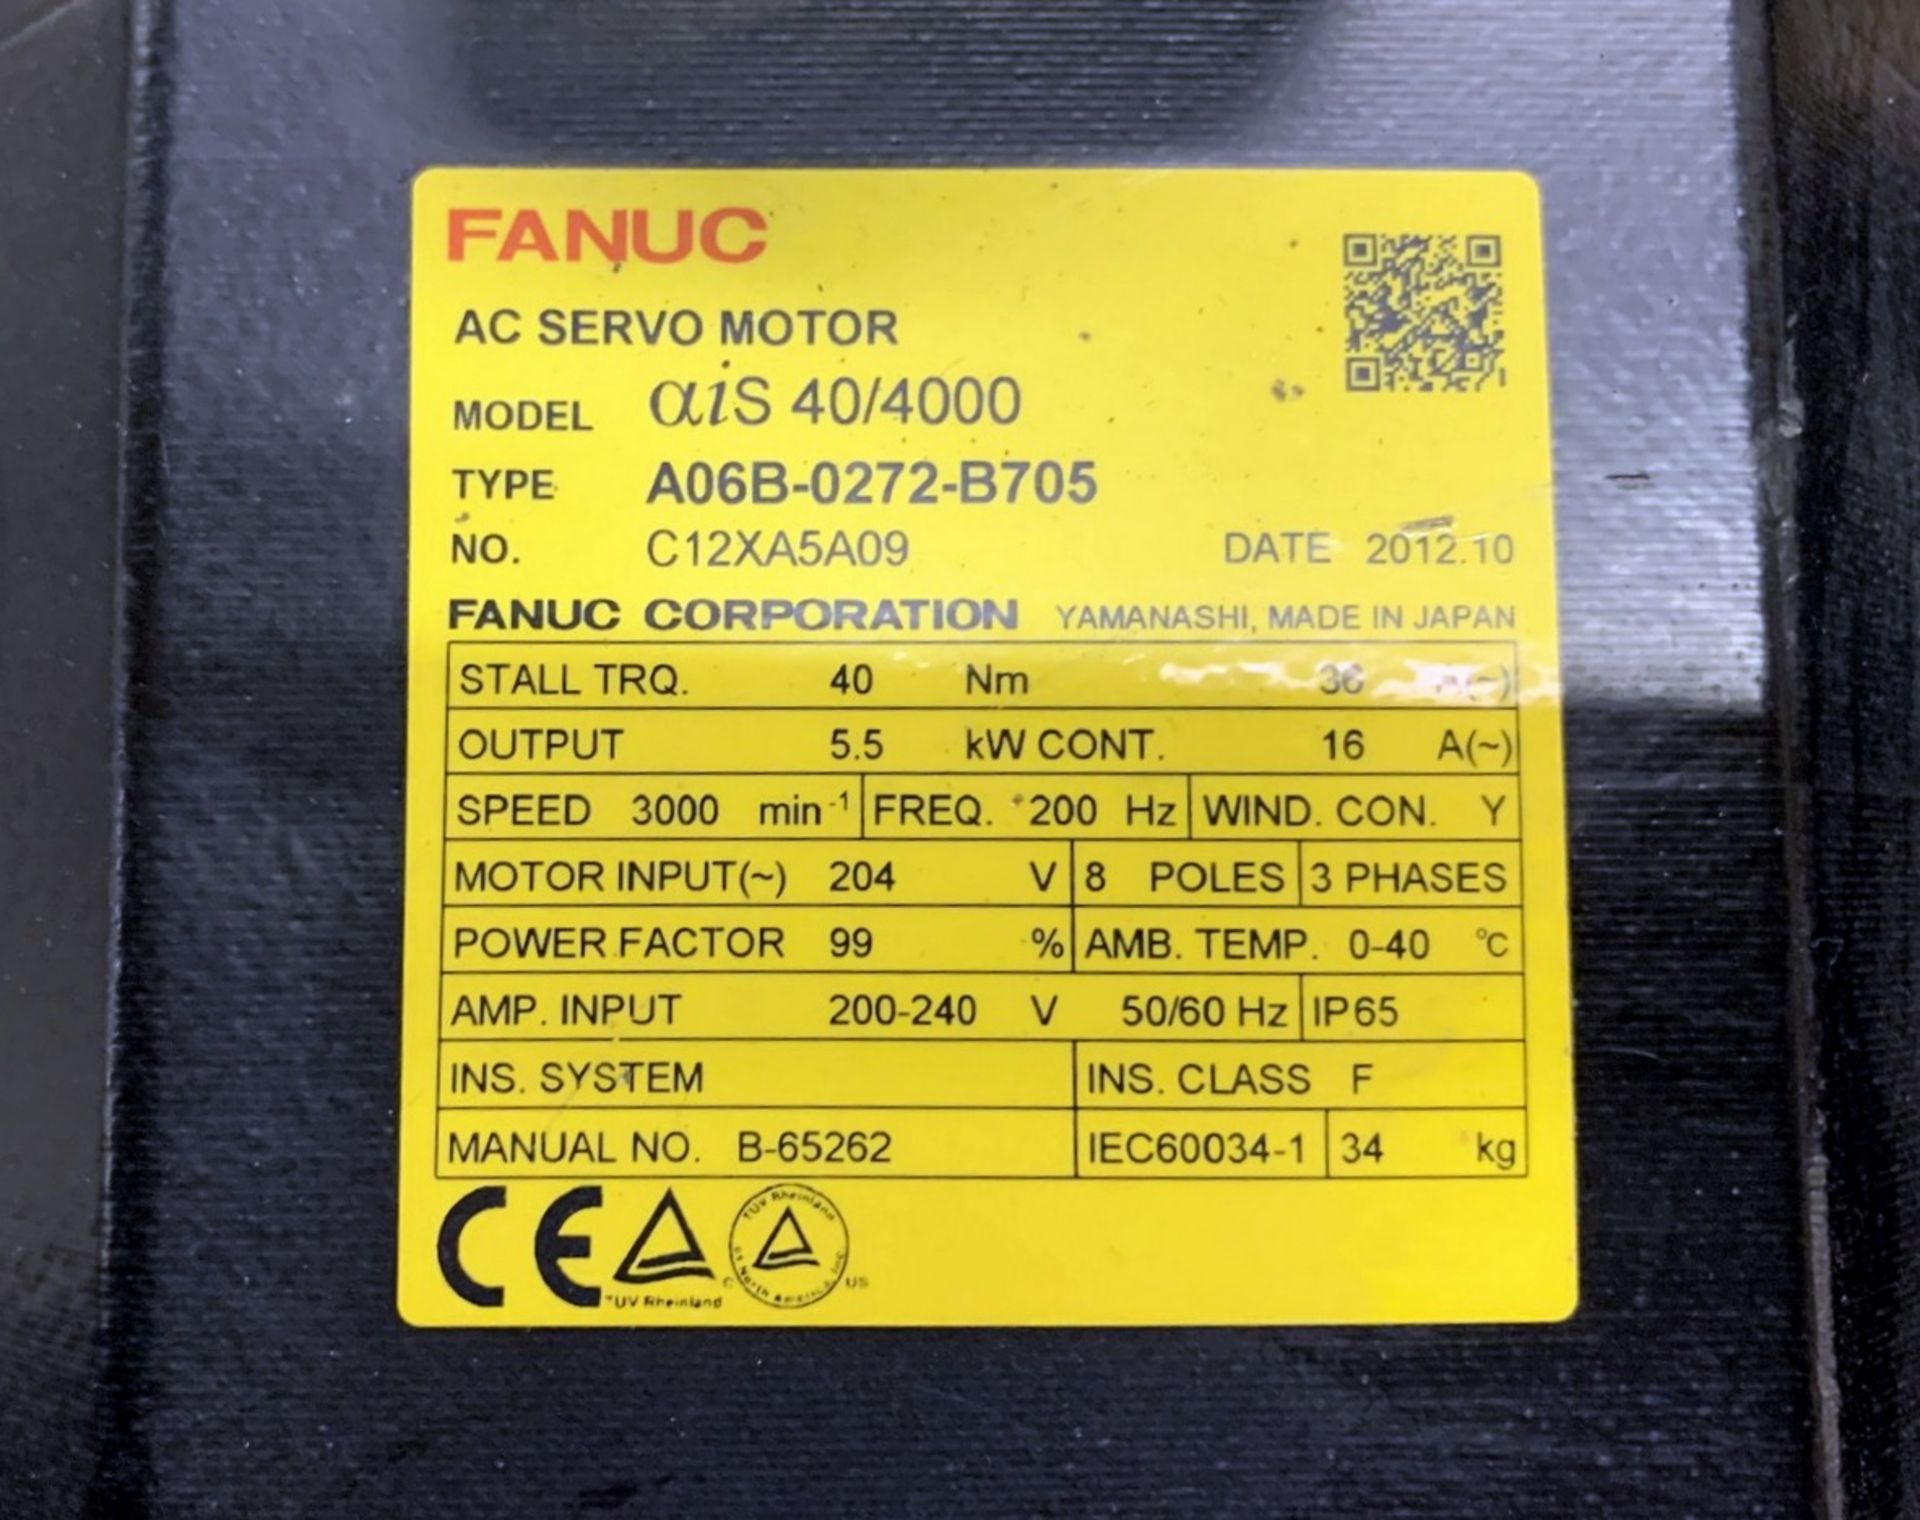 Fanuc Mdl. ais40/4000 AC Servo Motor (All Items MUST be Removed by Thursday, December 19, 2019. - Image 3 of 3